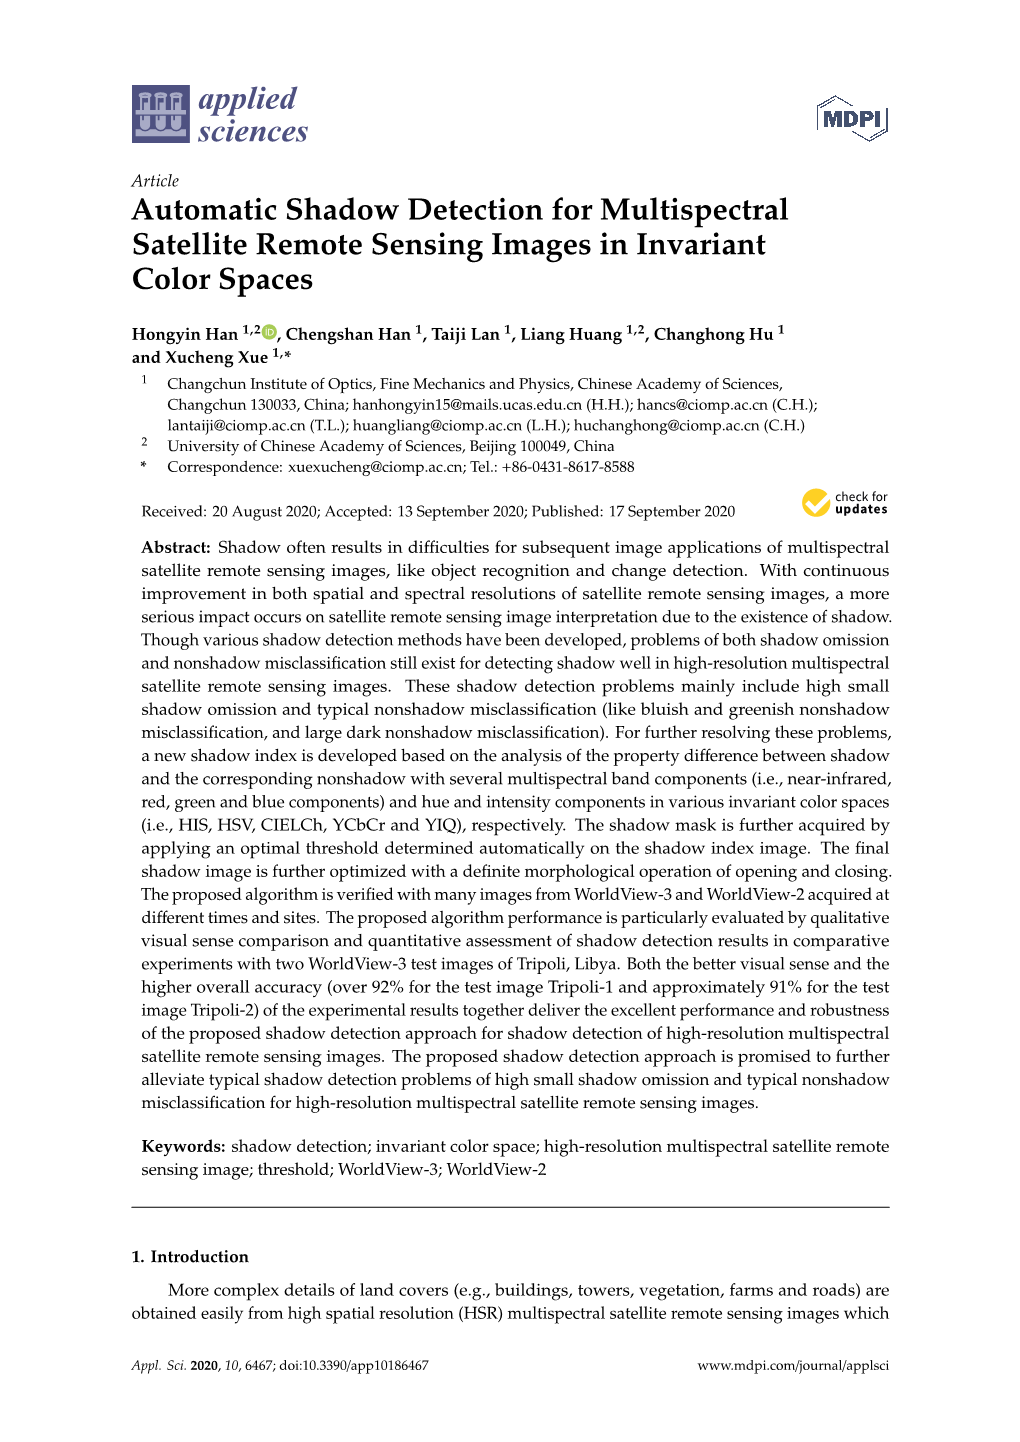 Automatic Shadow Detection for Multispectral Satellite Remote Sensing Images in Invariant Color Spaces